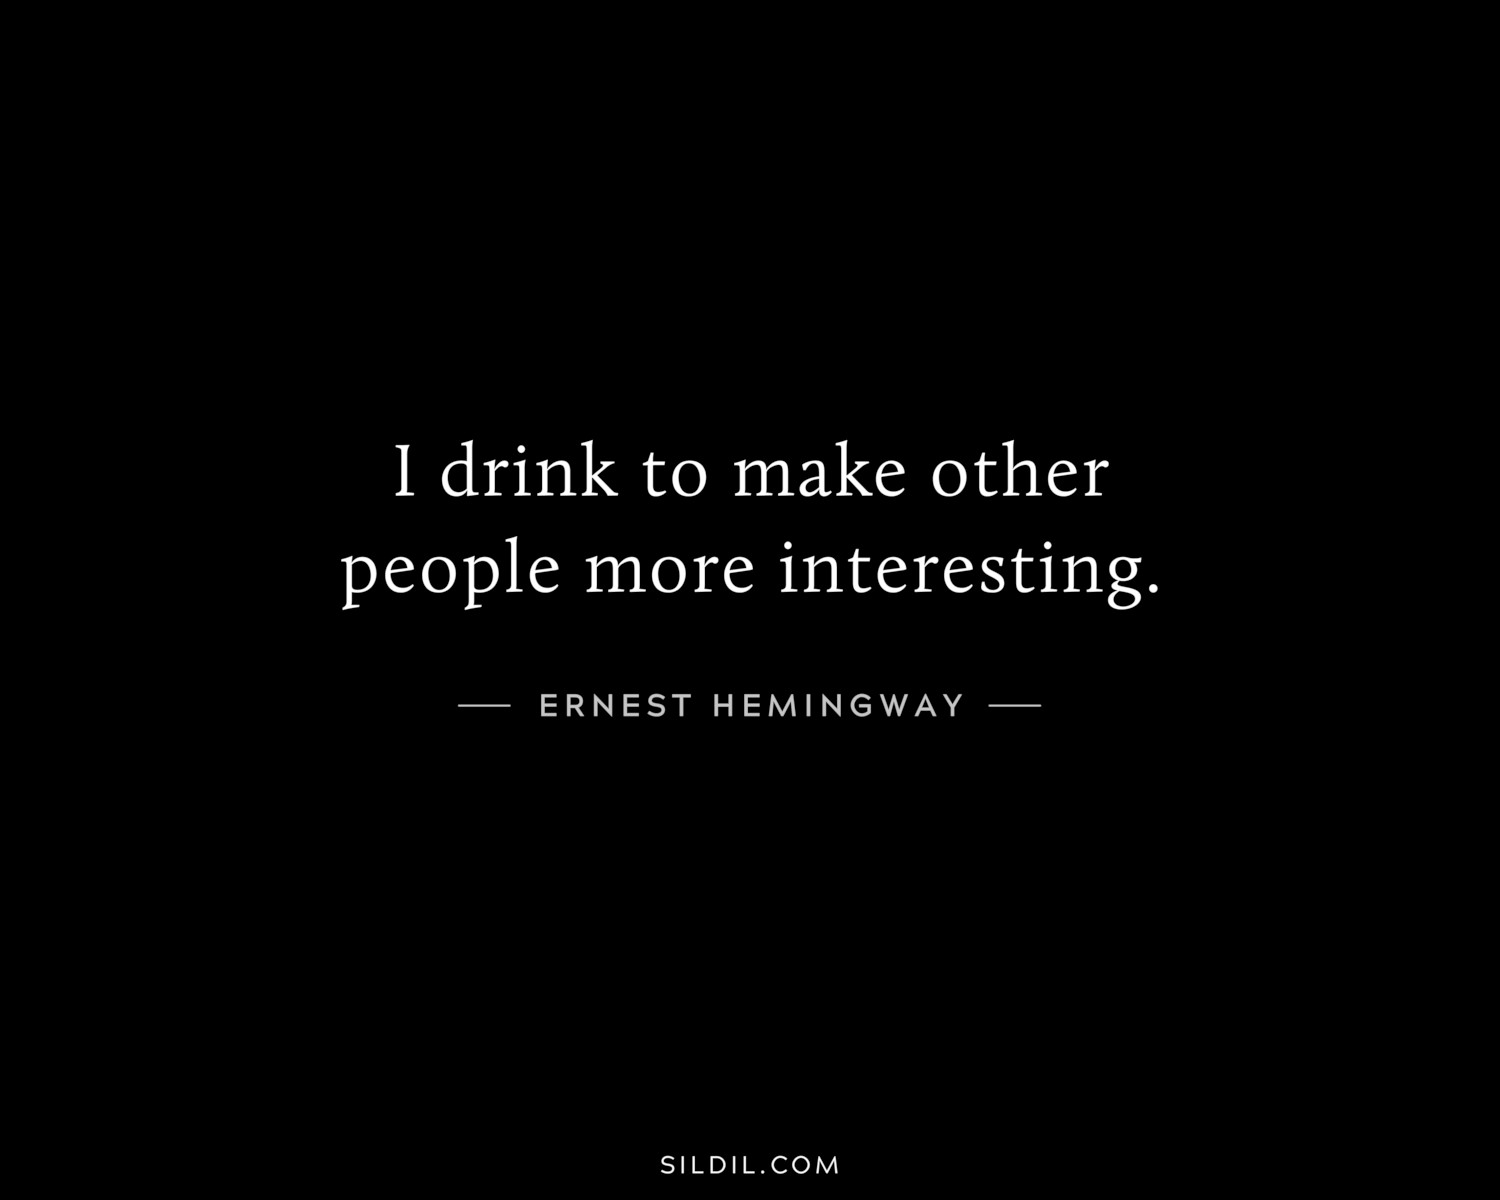 I drink to make other people more interesting.